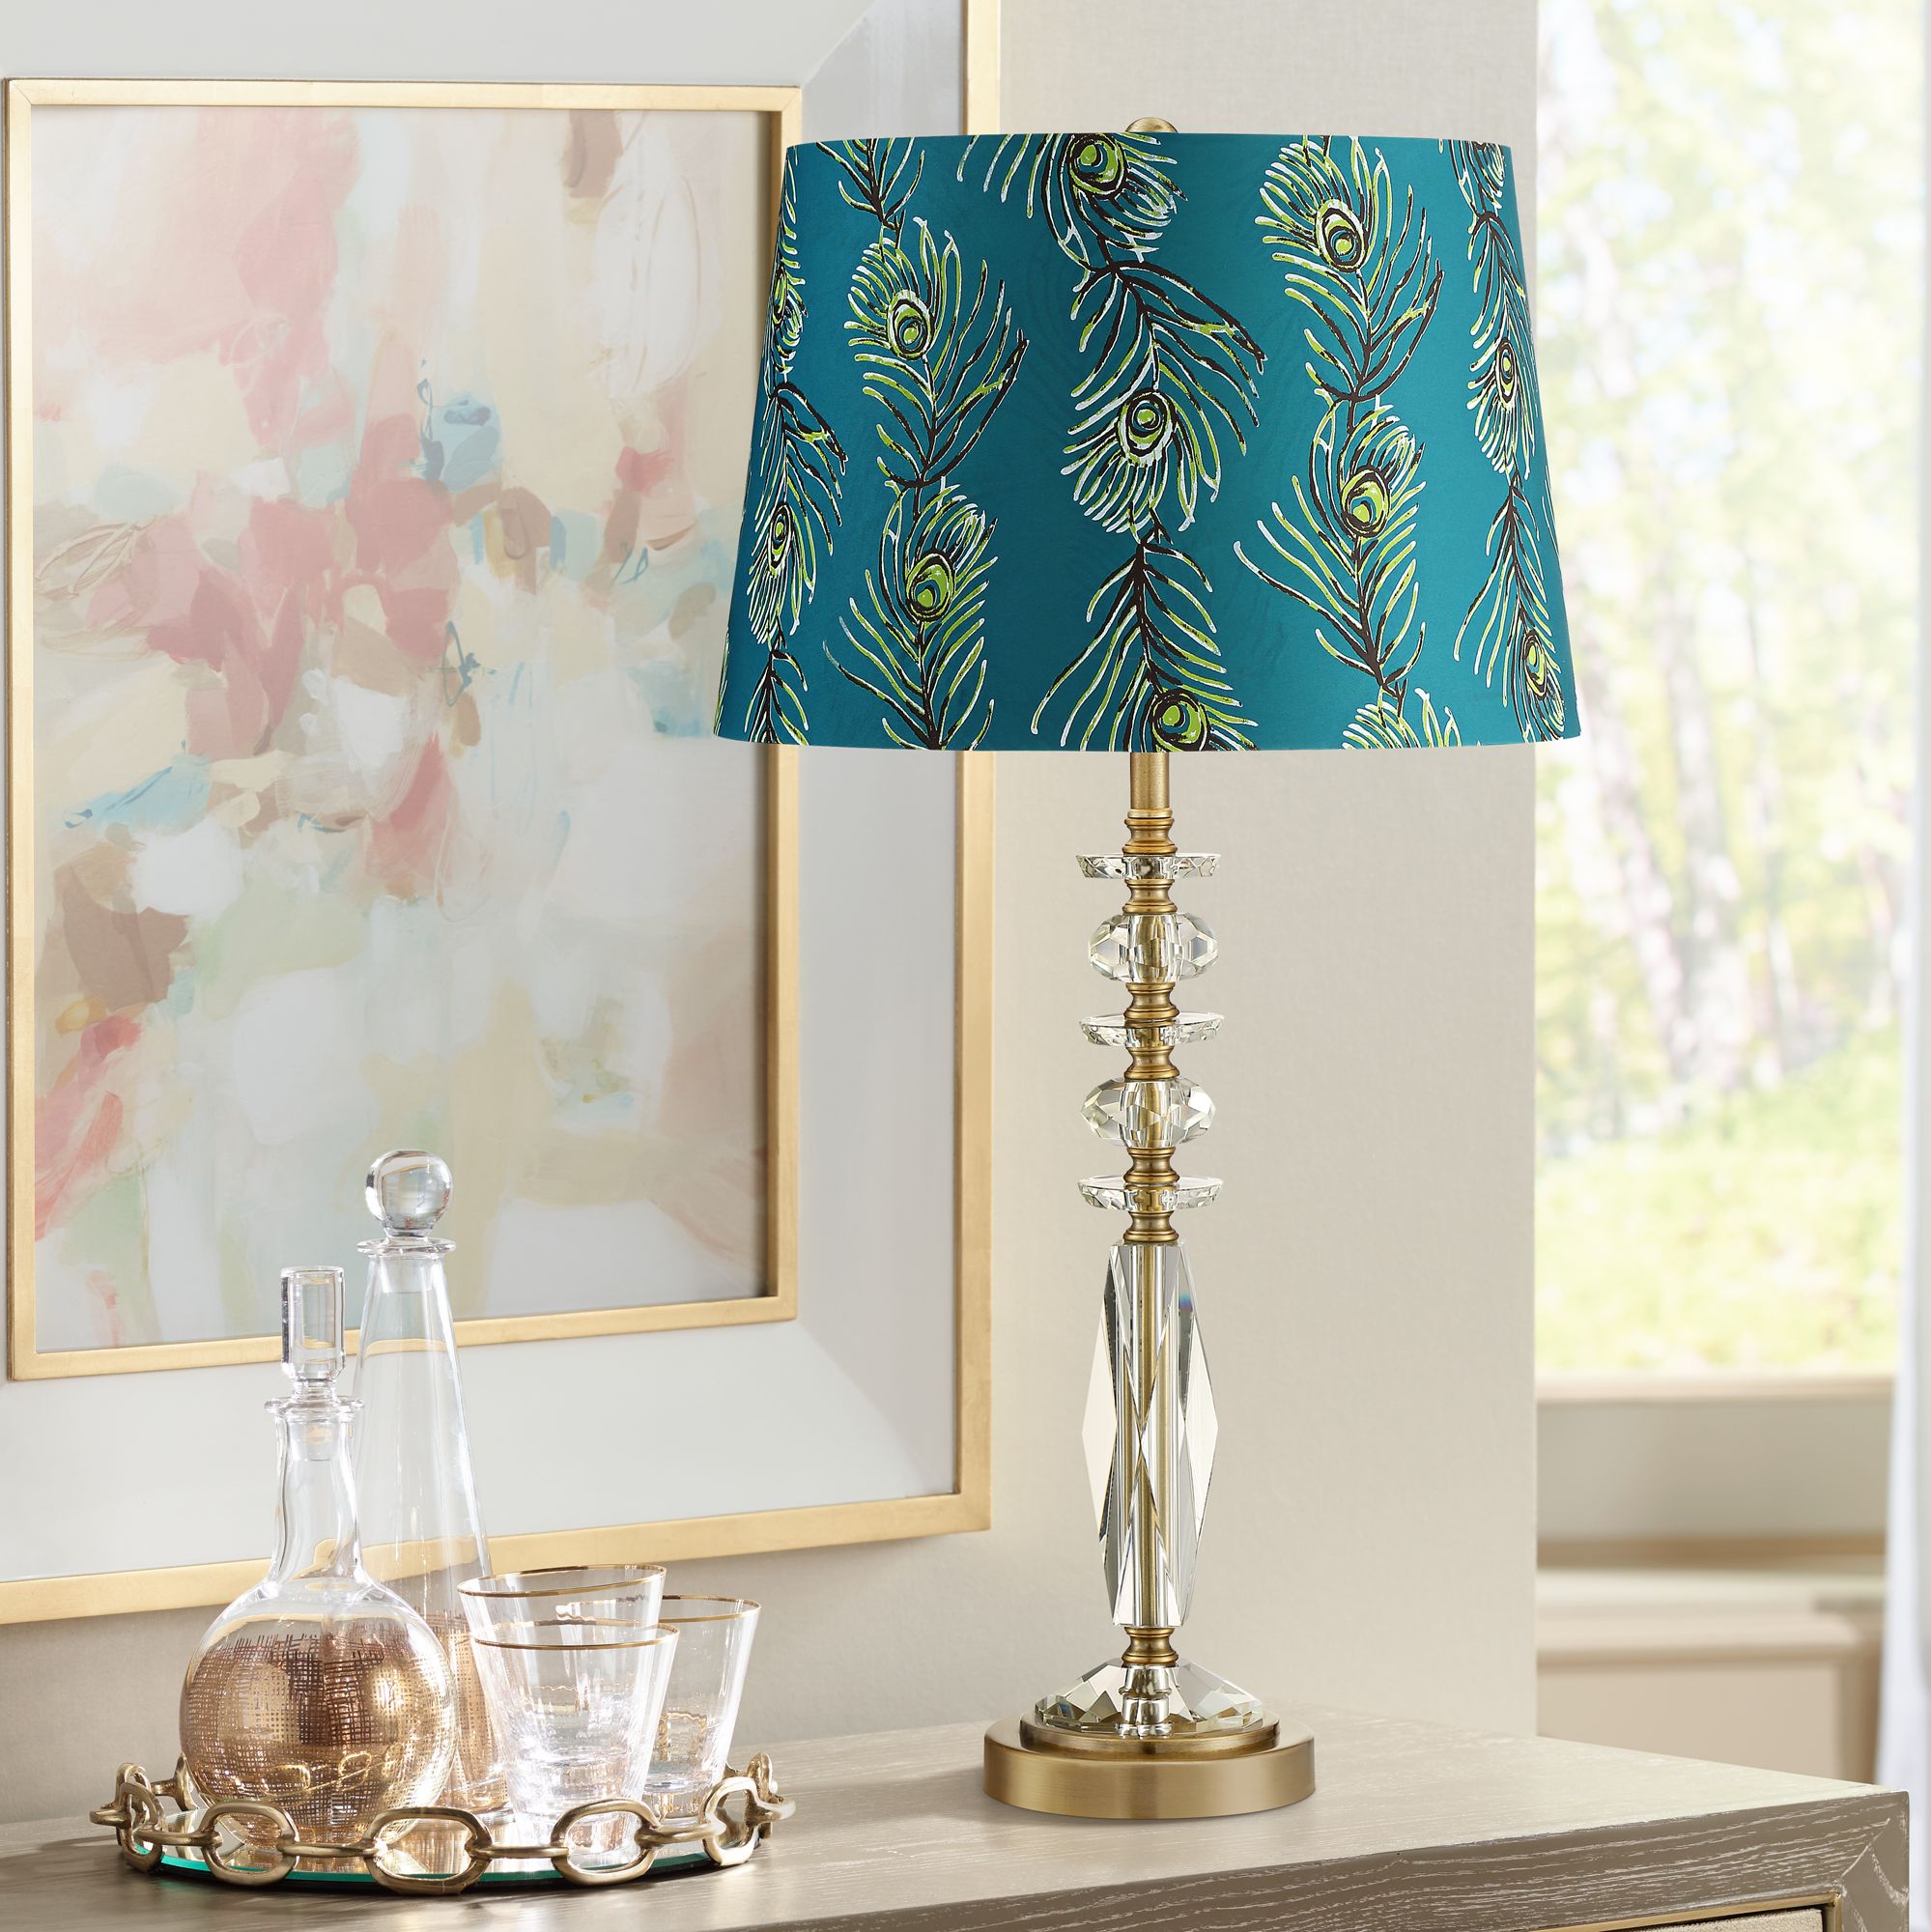 Pavone Crystal Table Lamp With Peacock Feather Print - Formal Living Room Lamp - HD Wallpaper 